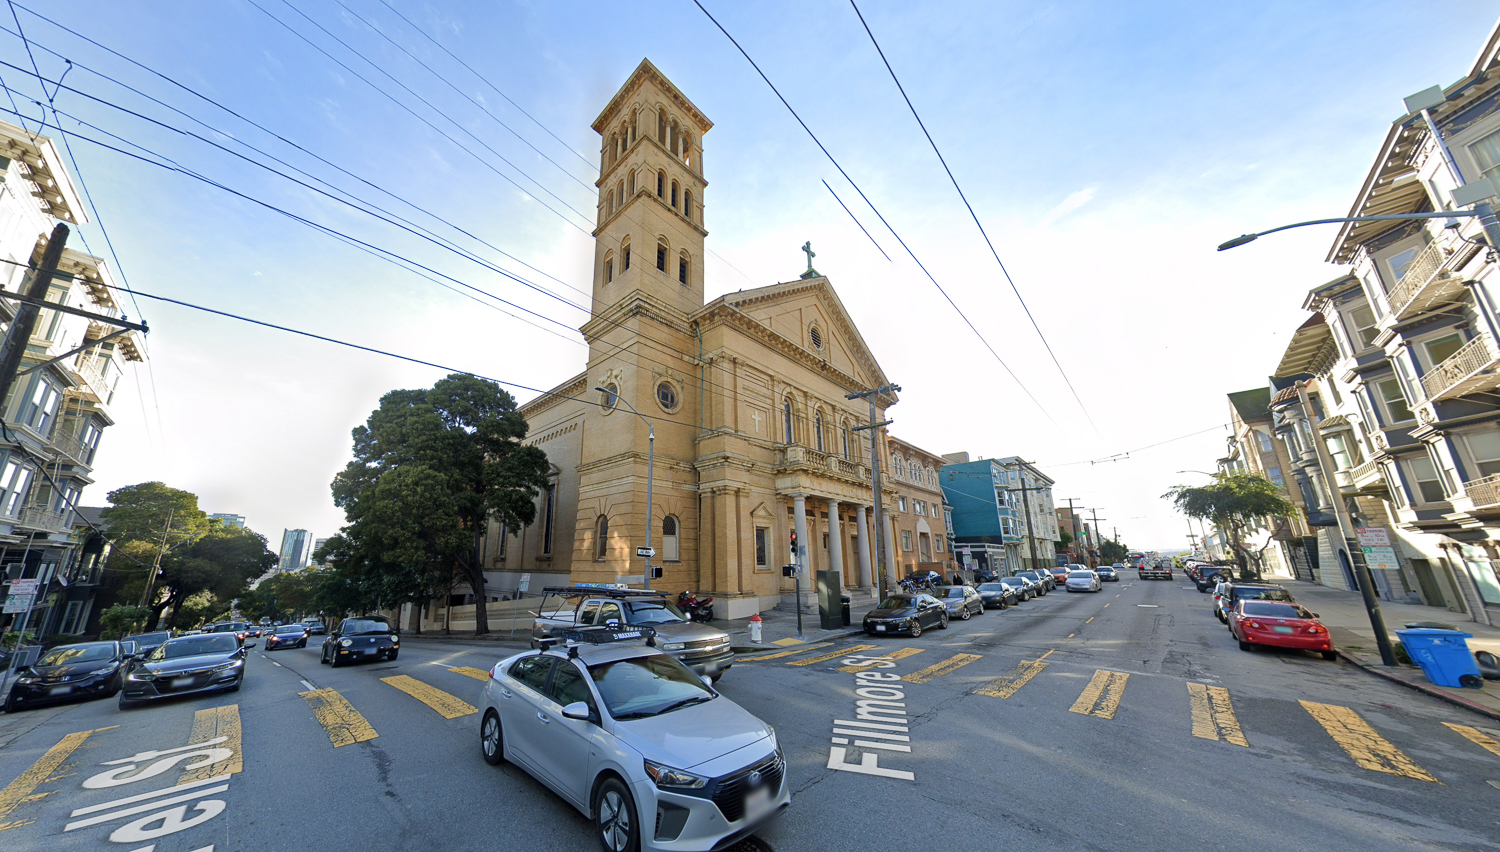 Sacred Heart Church, image by Google Street View